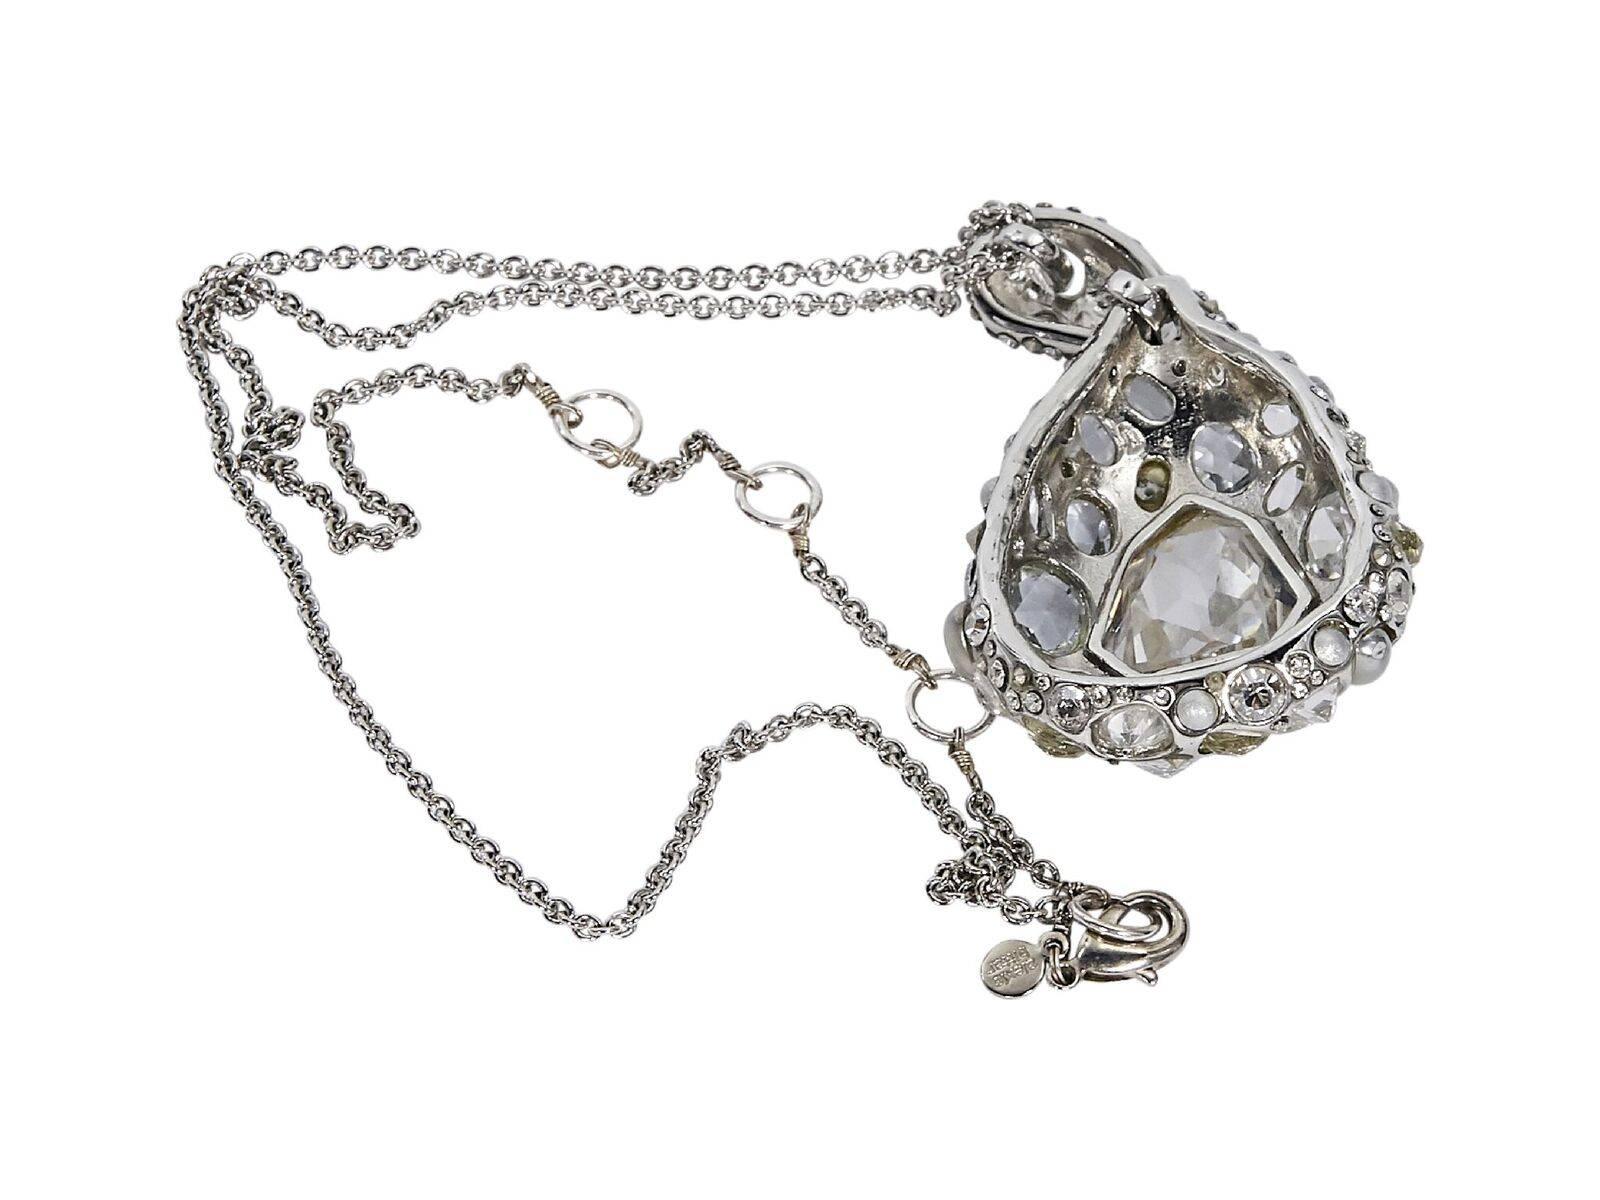 Product details:  Silvertone crystal-set teardrop pendant necklace by Alexis Bittar.  Adjustable lobster clasp closure.  19